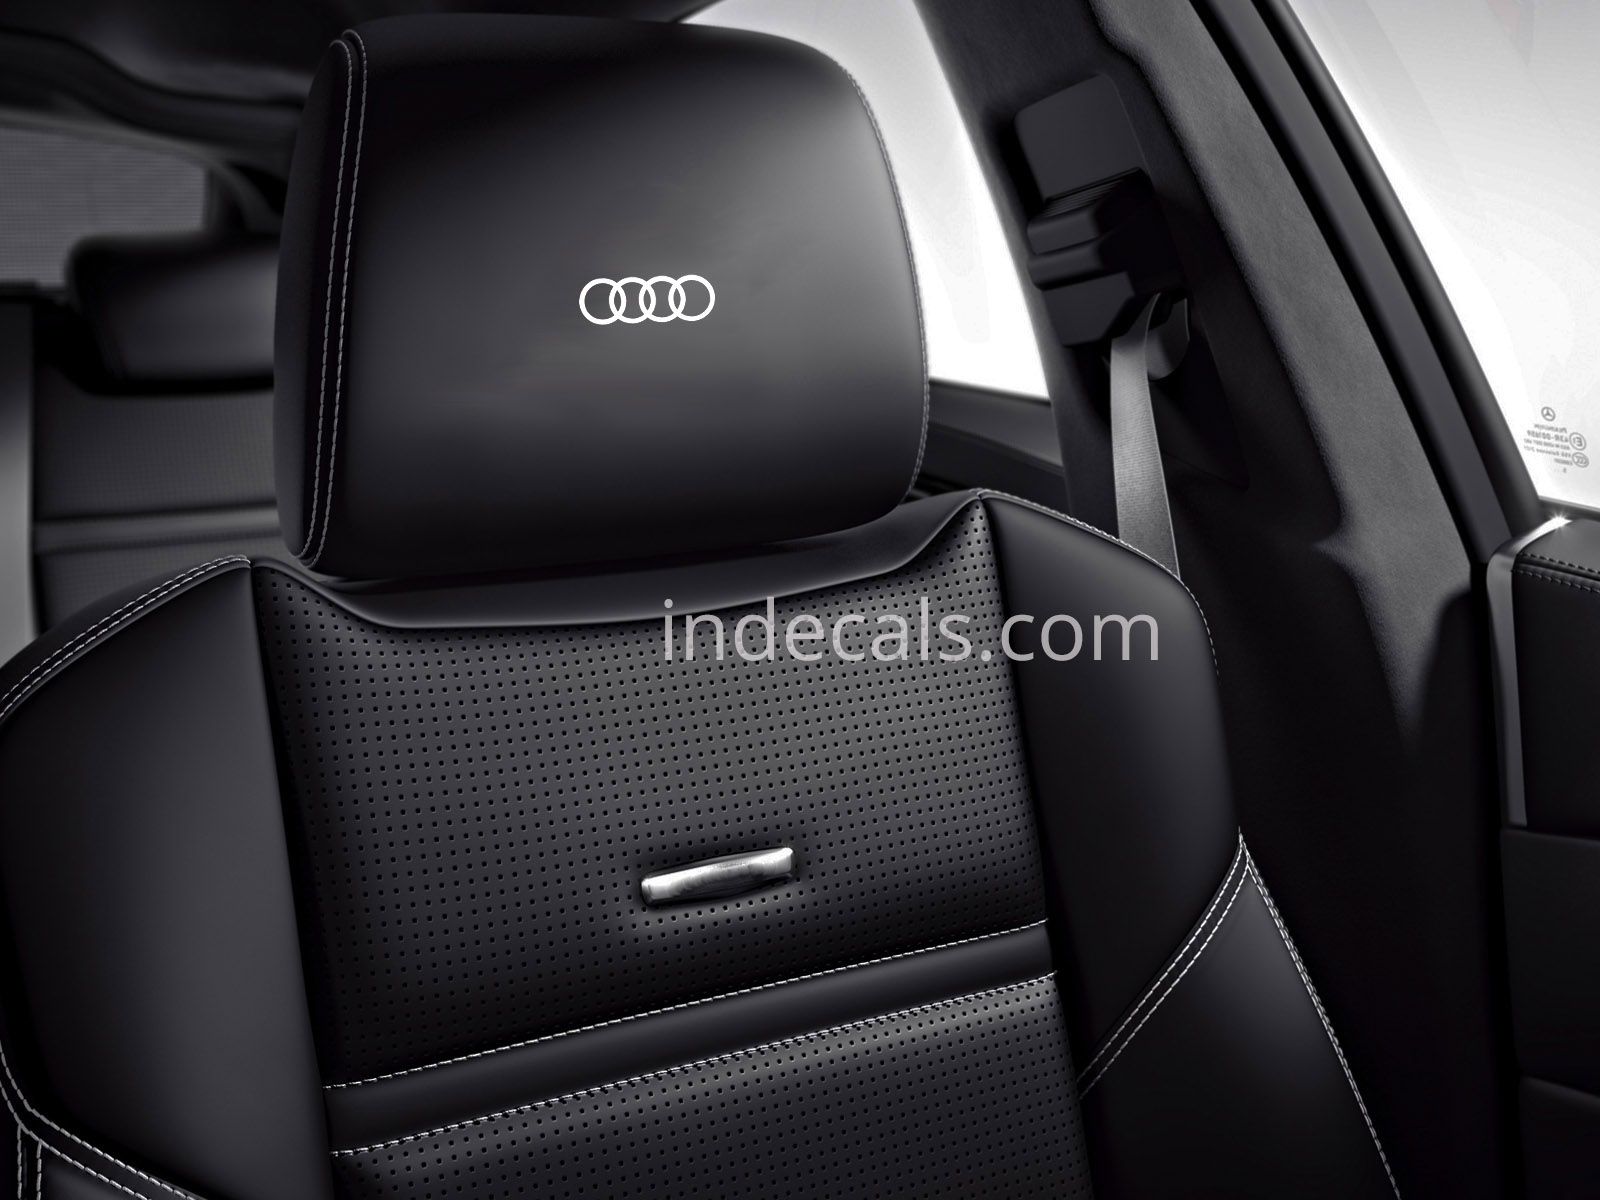 6 x Audi Rings Stickers for Headrests - White